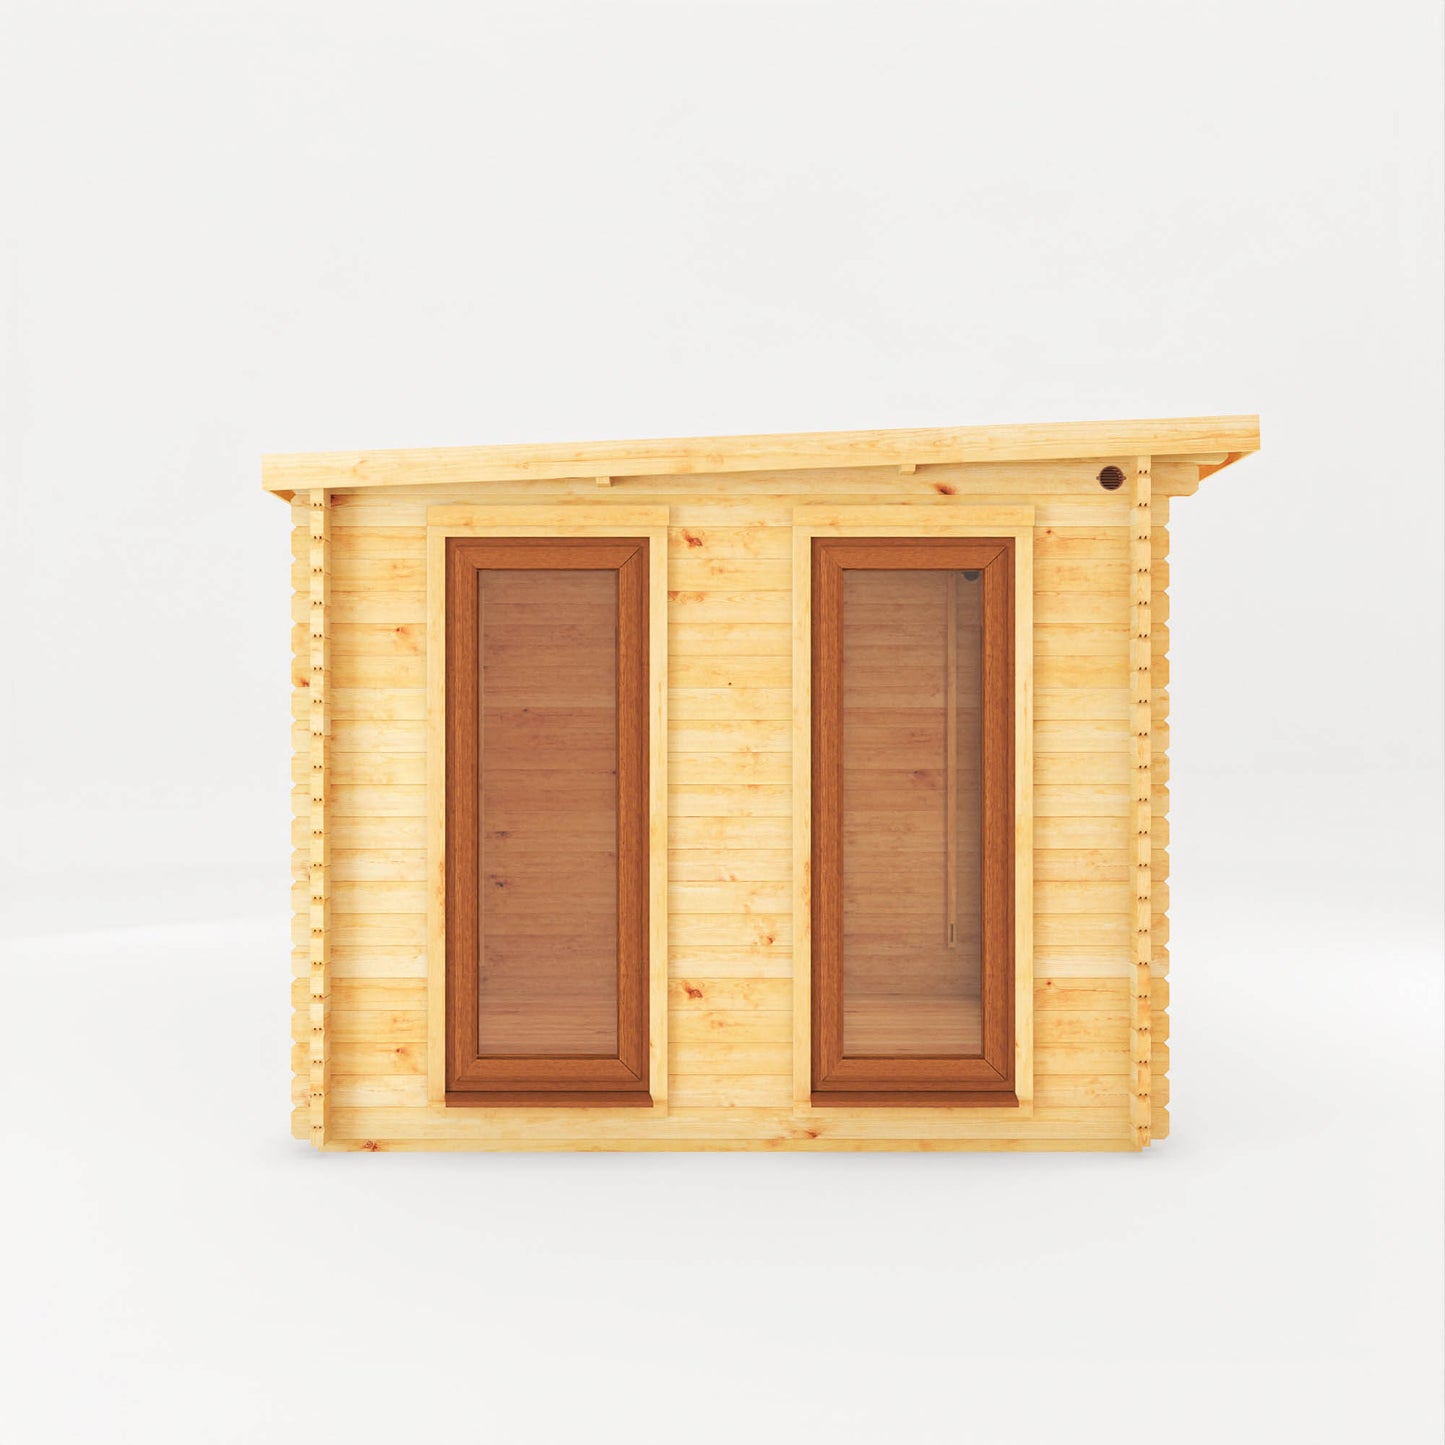 The 4.1m x 3m Wren Pent Log Cabin with Side Shed and Oak UPVC